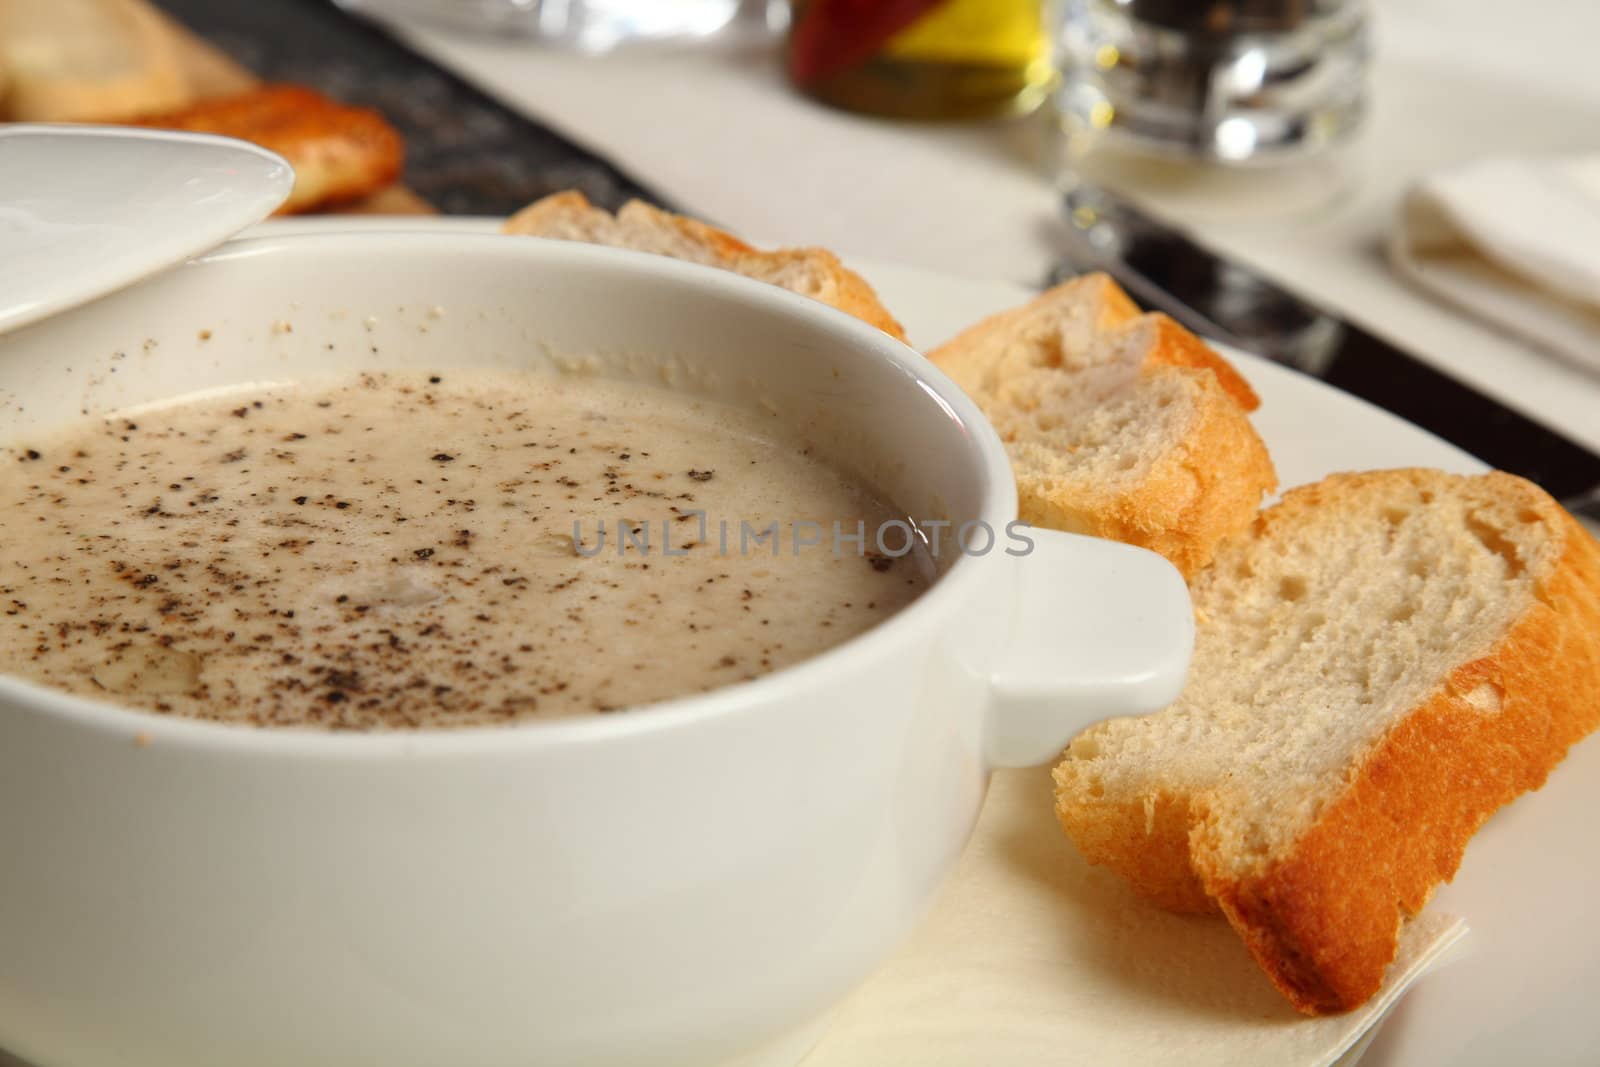 Mushroom porcini soup served with bread